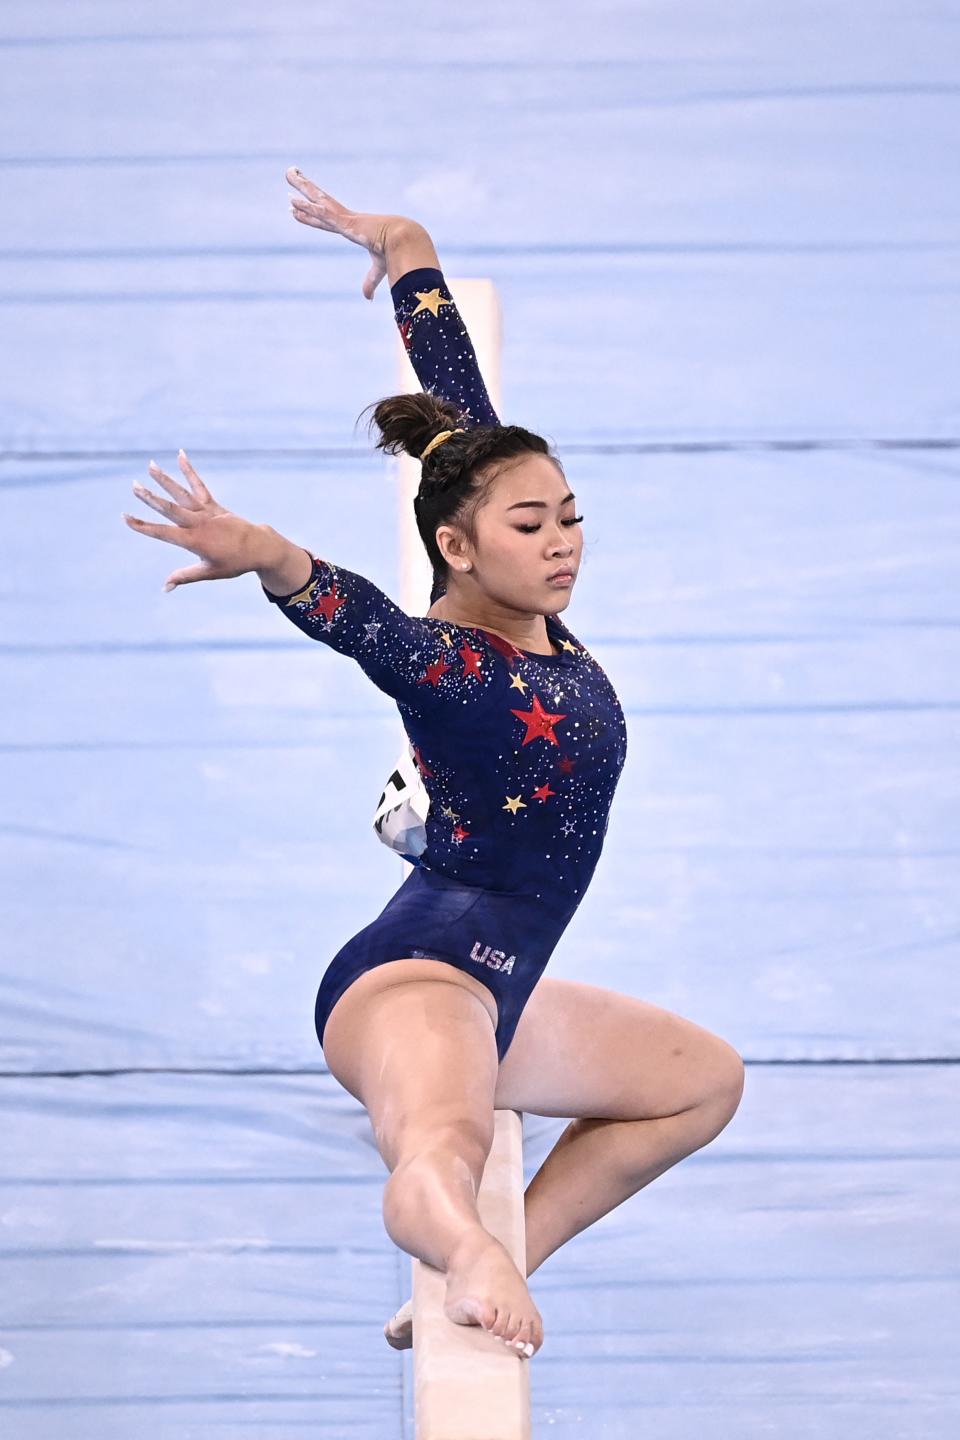 <p>USA's Sunisa Lee competes in the artistic gymnastics balance beam event of the women's qualification during the Tokyo 2020 Olympic Games at the Ariake Gymnastics Centre in Tokyo on July 25, 2021. (Photo by Lionel BONAVENTURE / AFP) (Photo by LIONEL BONAVENTURE/AFP via Getty Images)</p> 